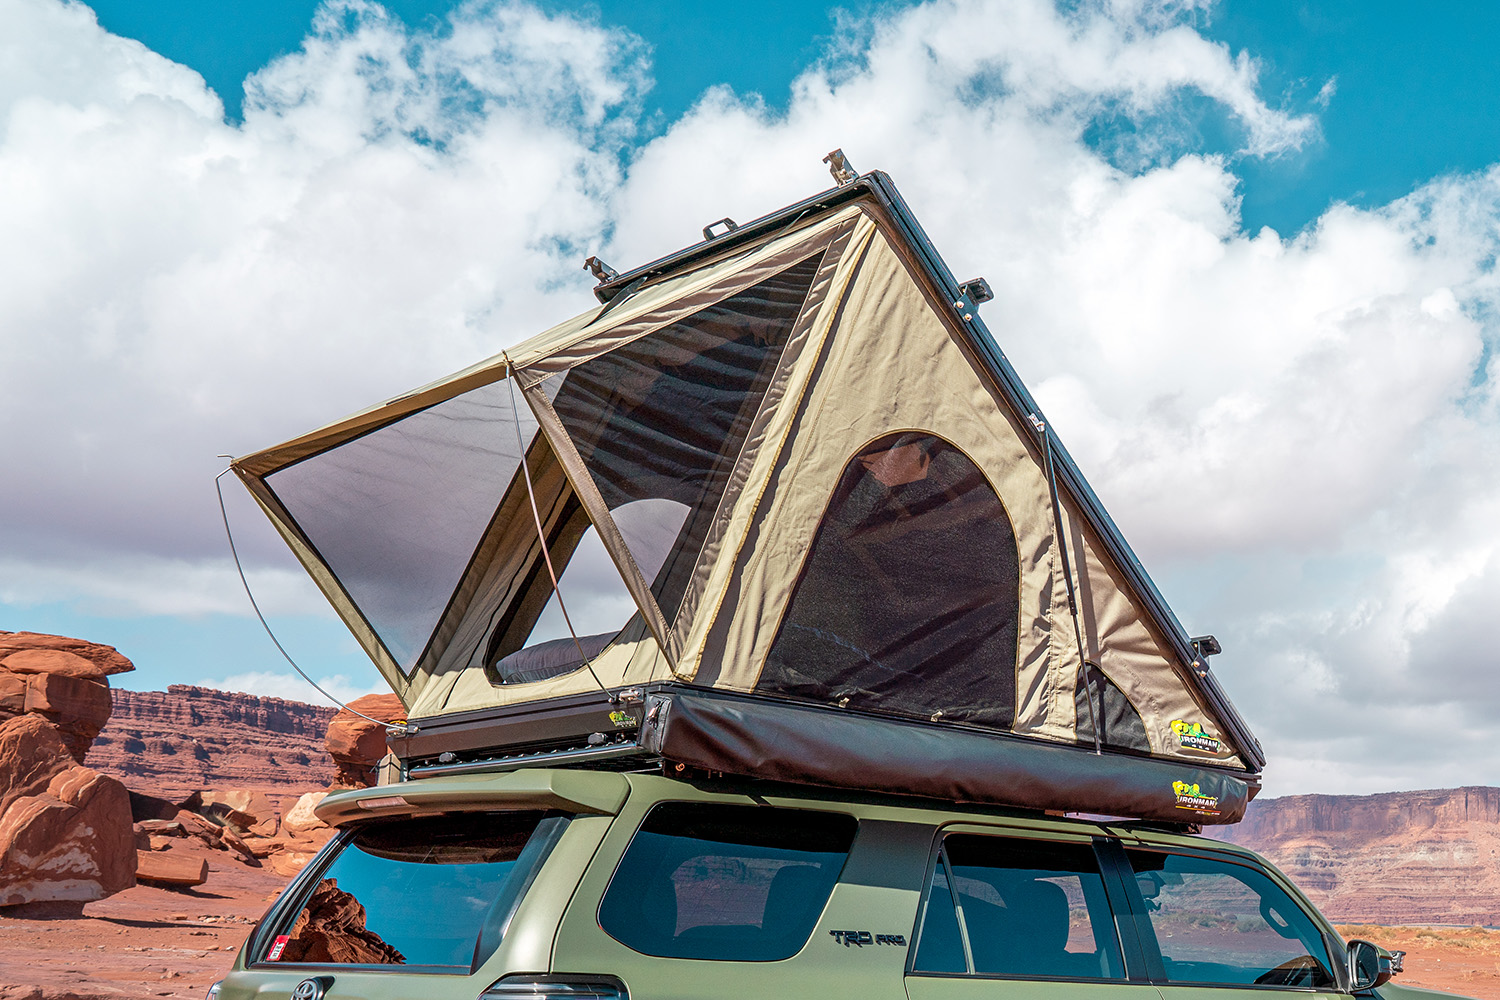 It appears you can mount an awning directly to the side of the tent. Is this the case?